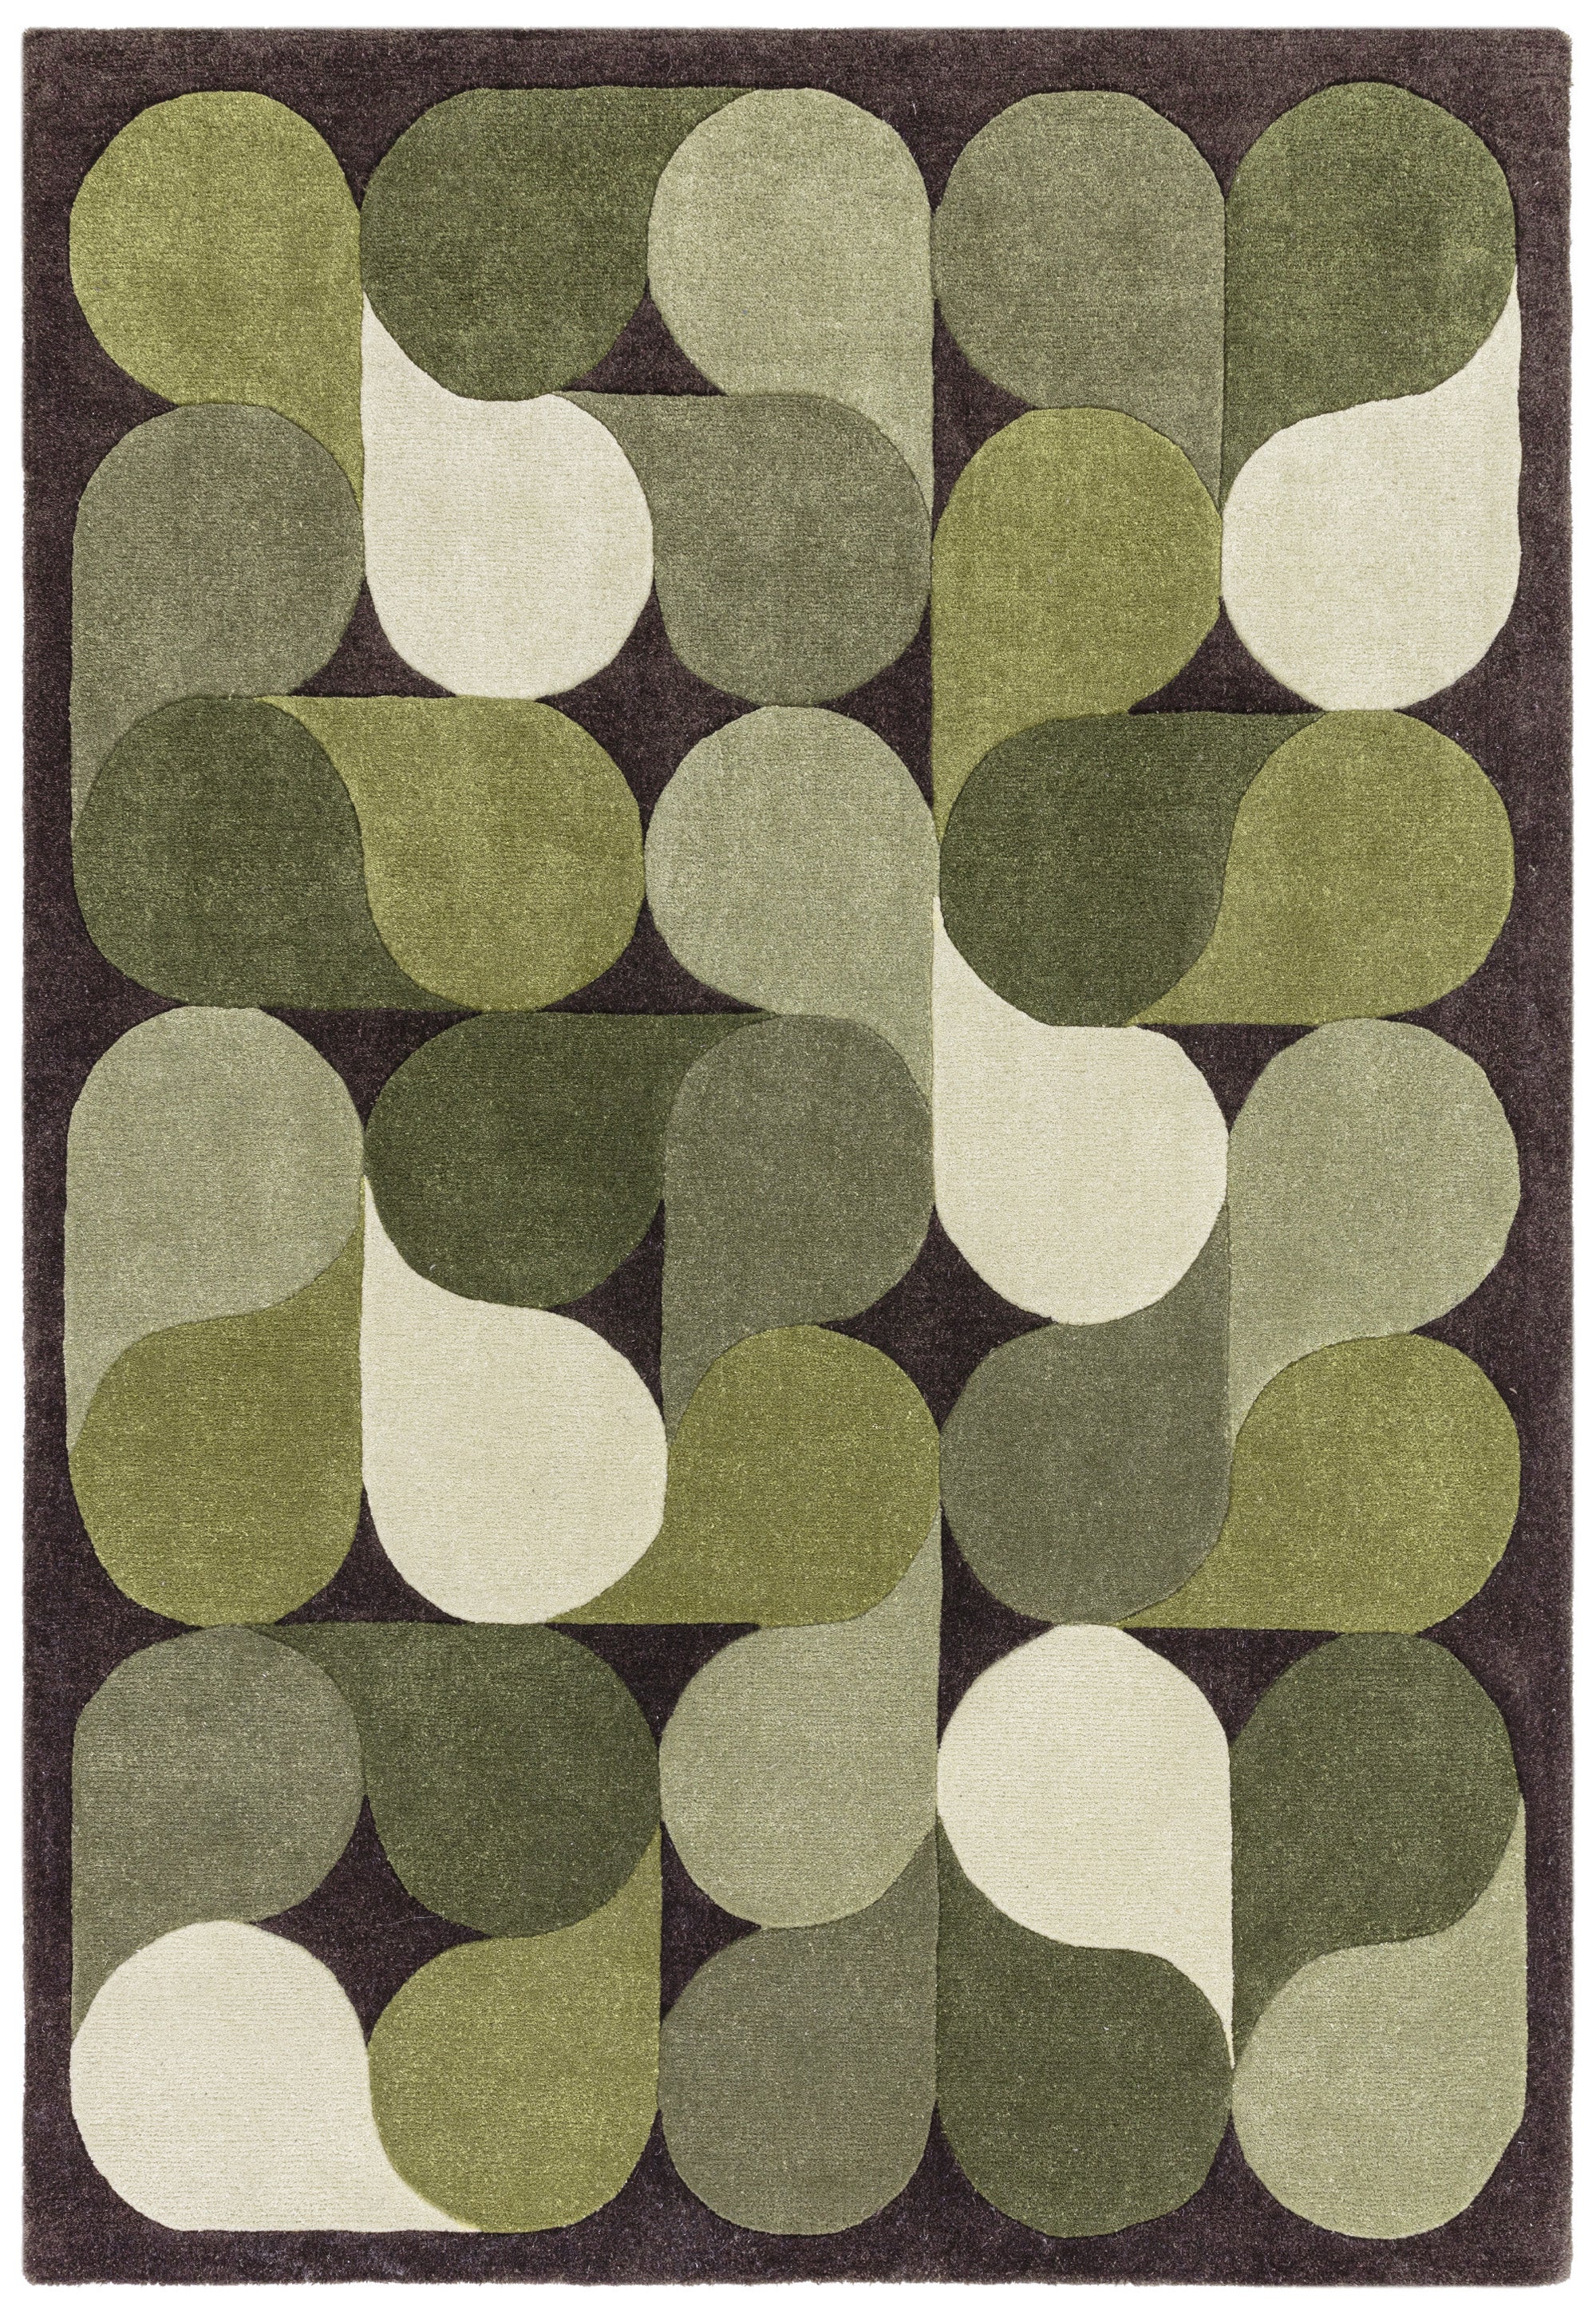 Green rug with an abstract pattern